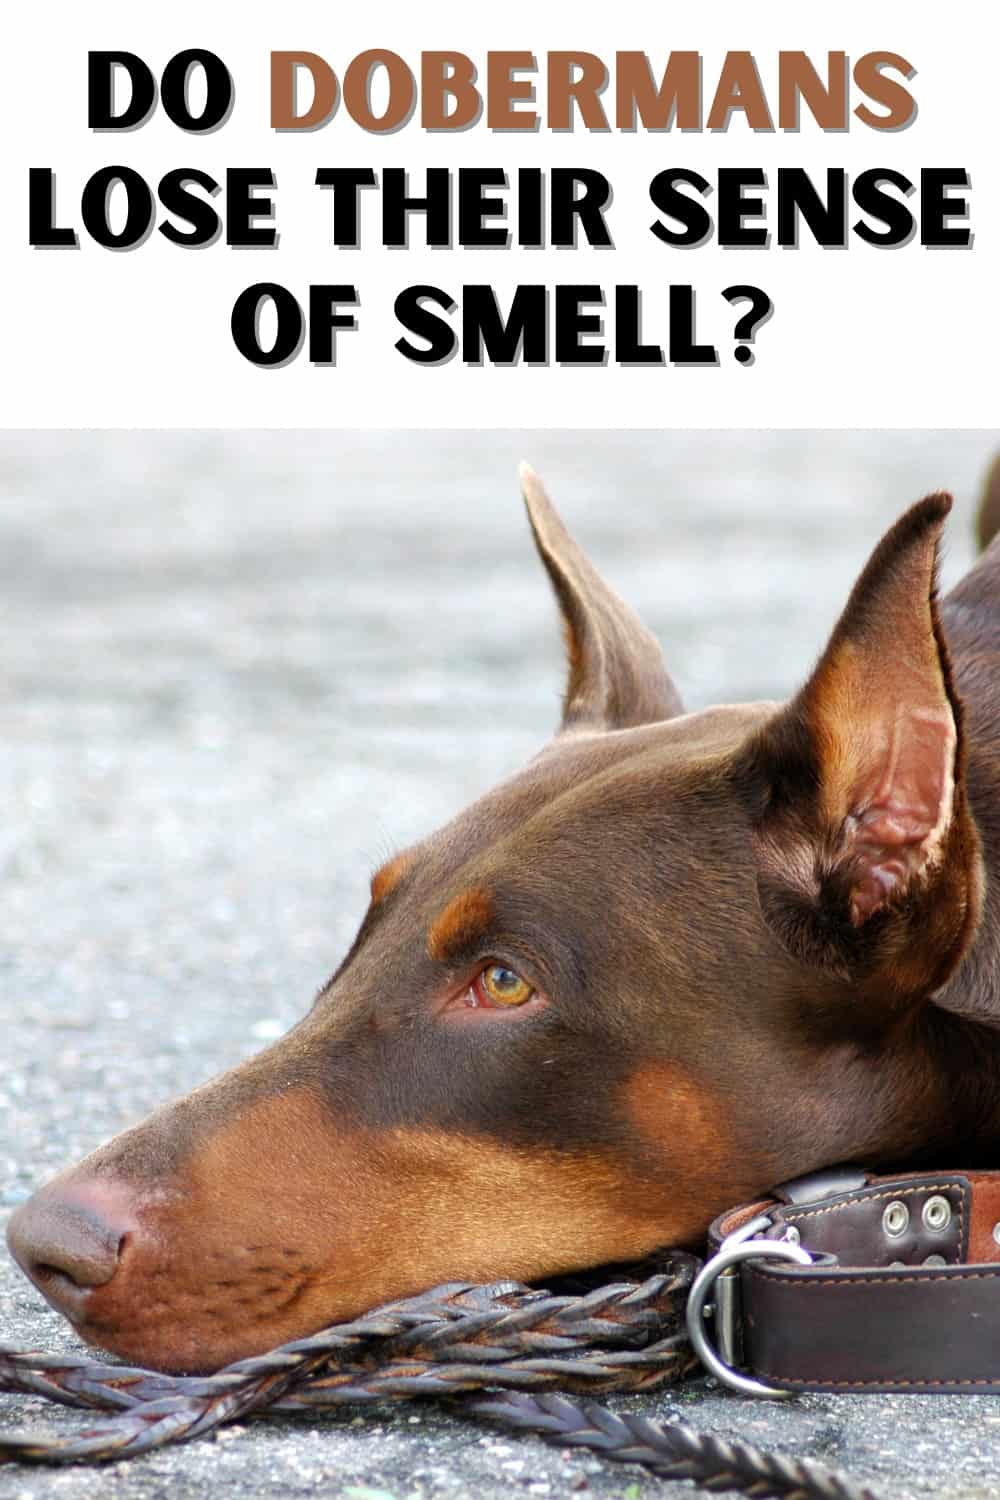 Dobermans do not naturally lose their sense of smell as they age